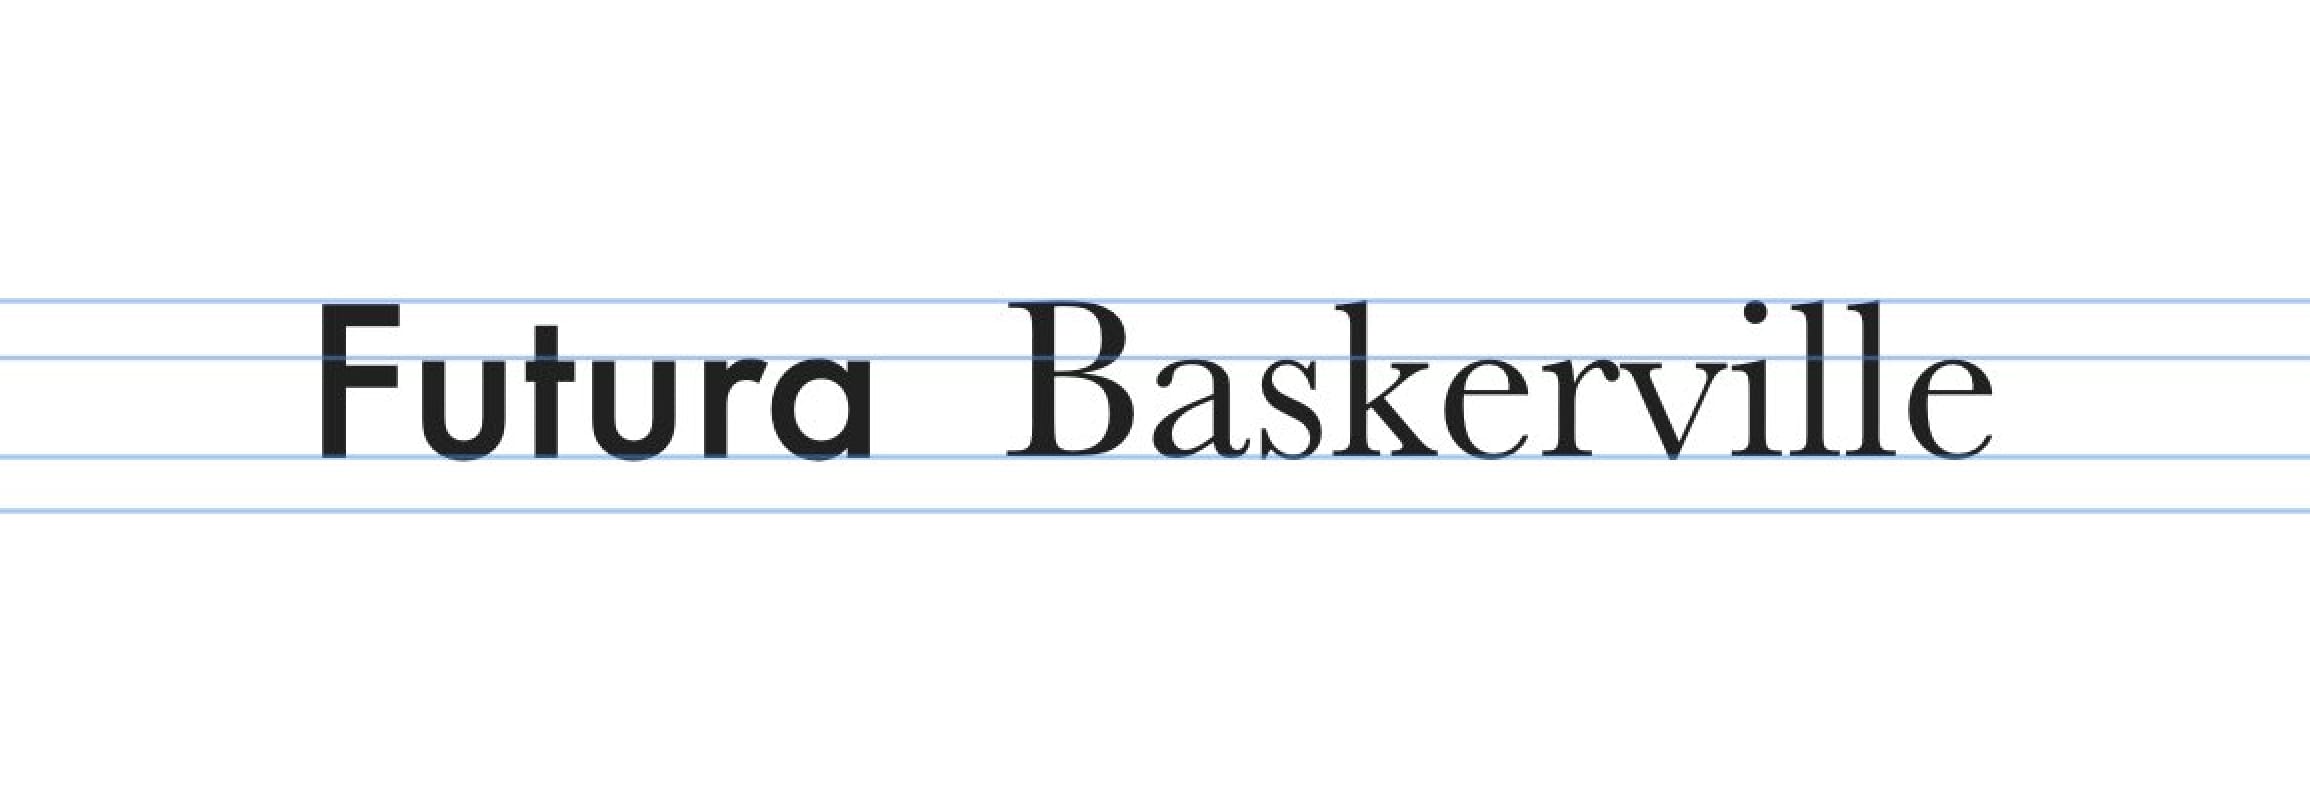 Above: Futura and Baskerville have a similar x-height which reinforces them as a good font combination.